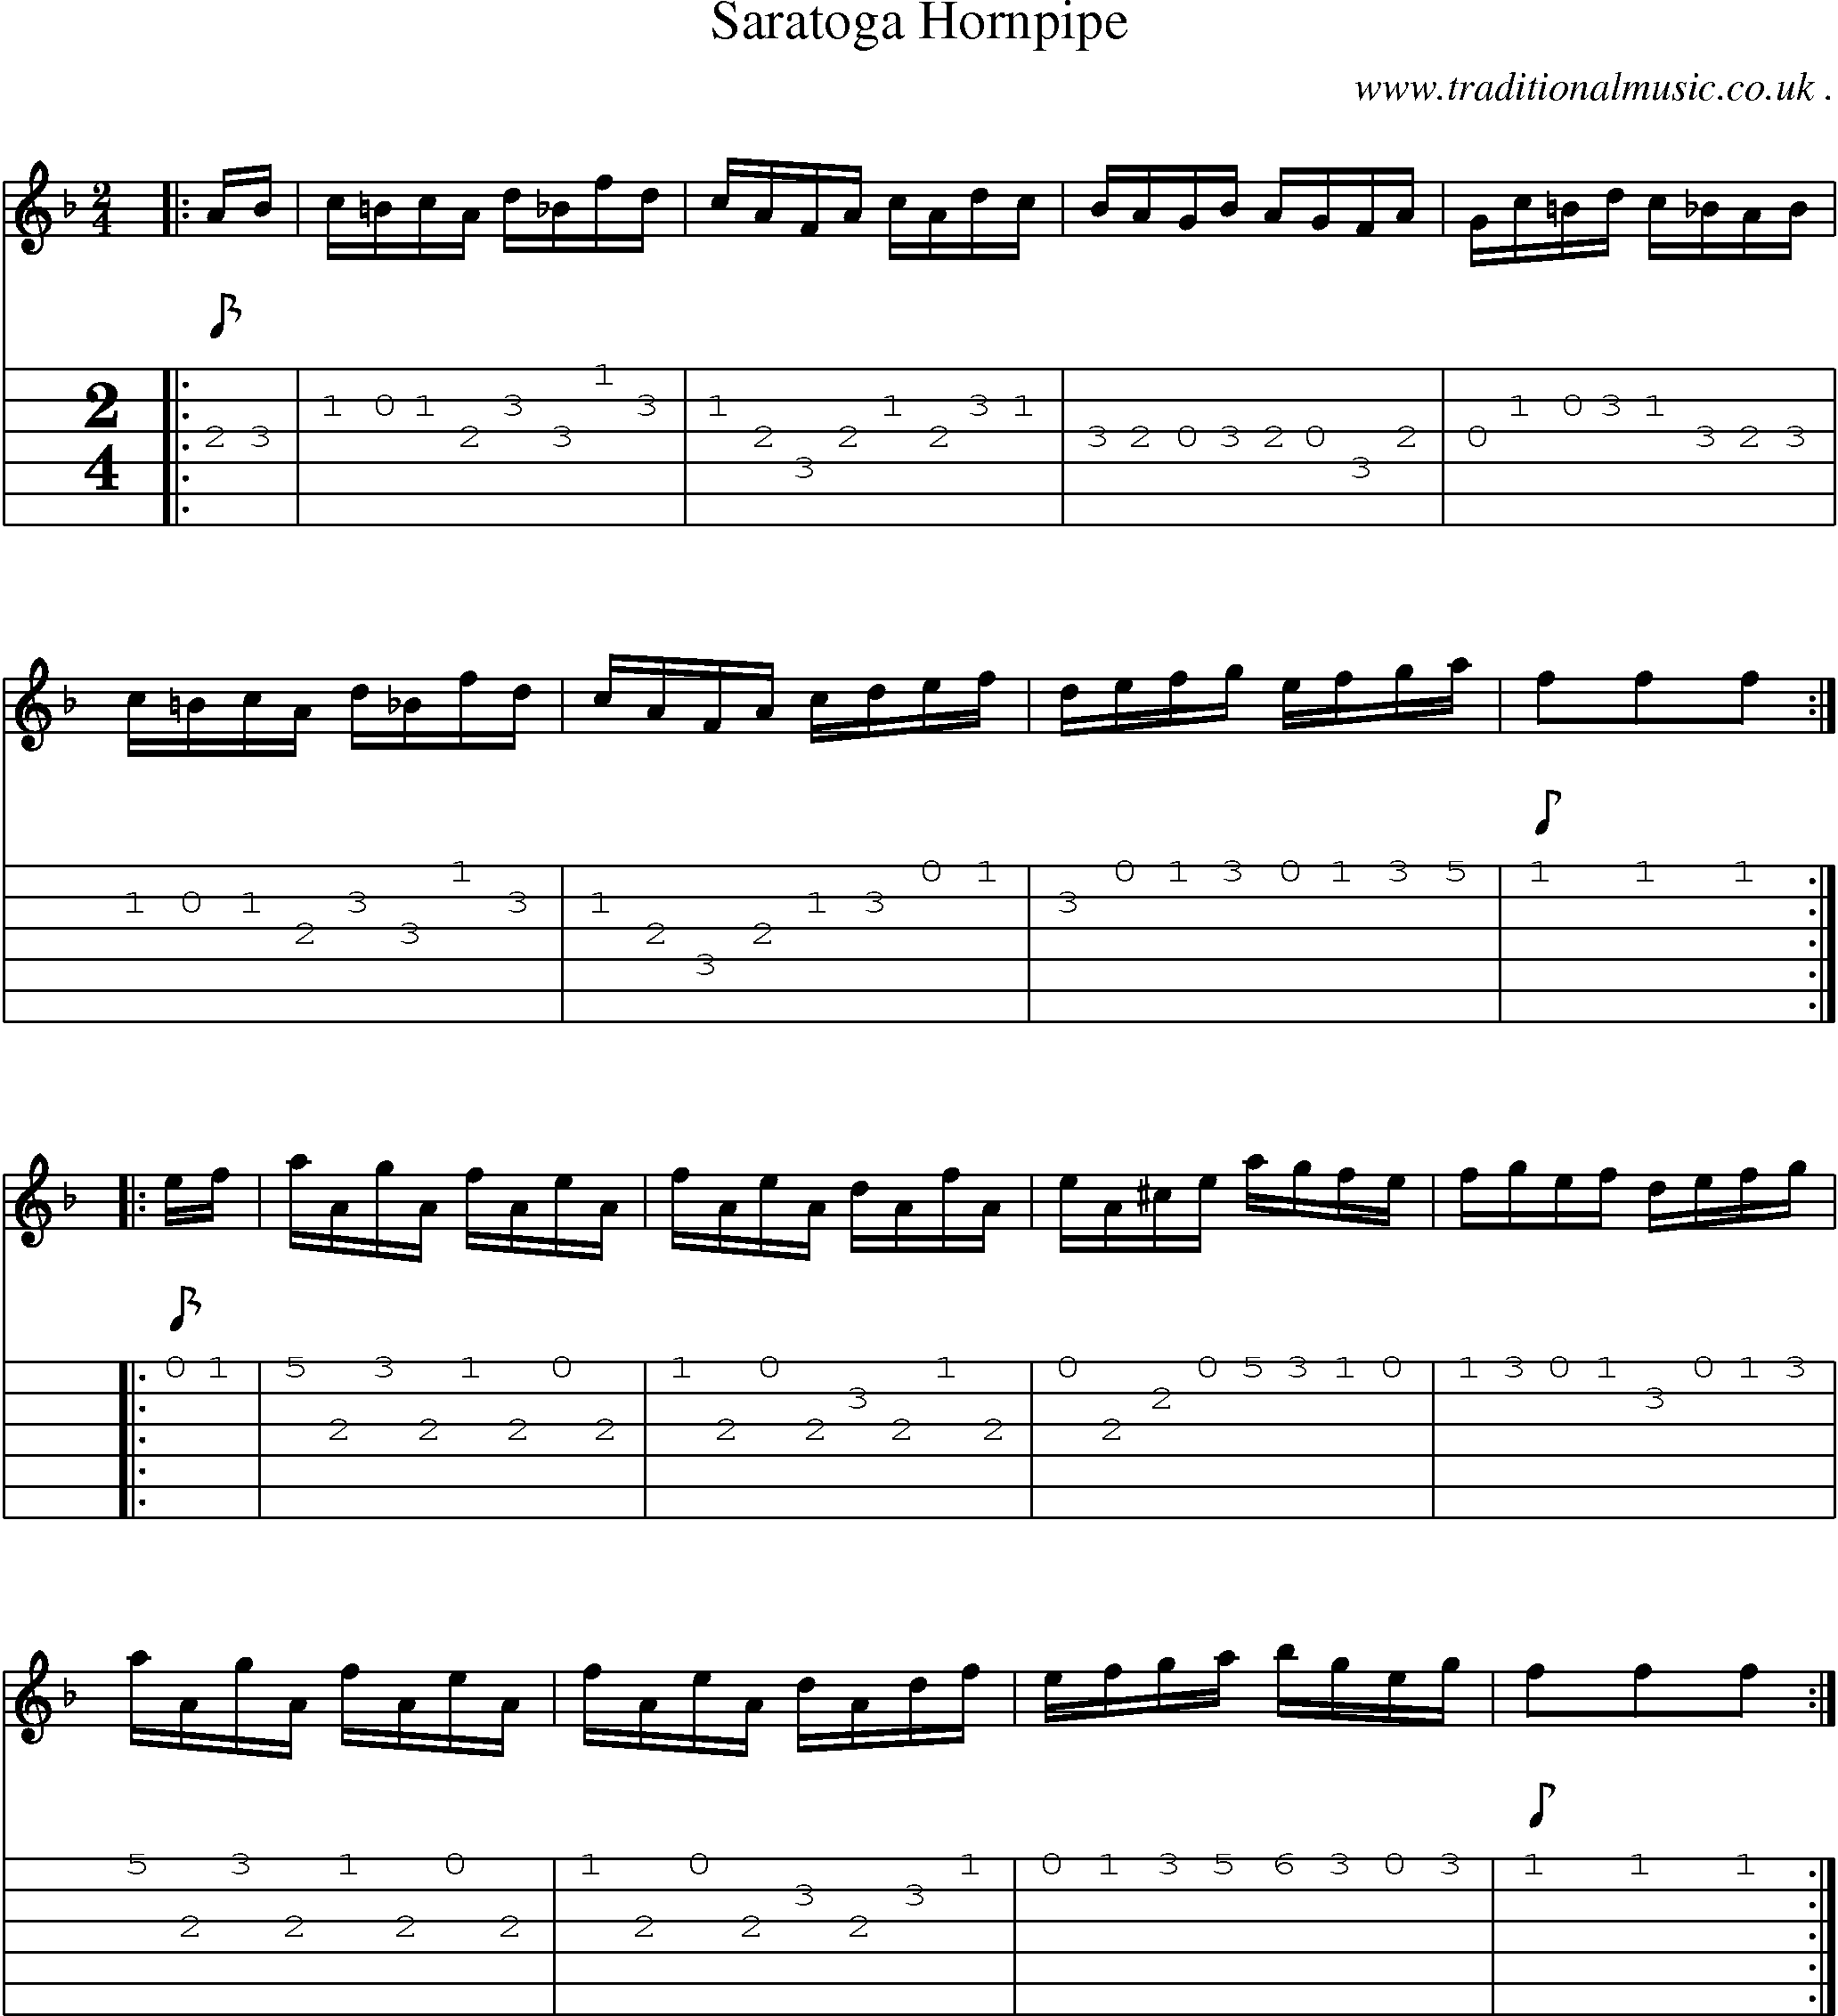 Music Score and Guitar Tabs for Saratoga Hornpipe